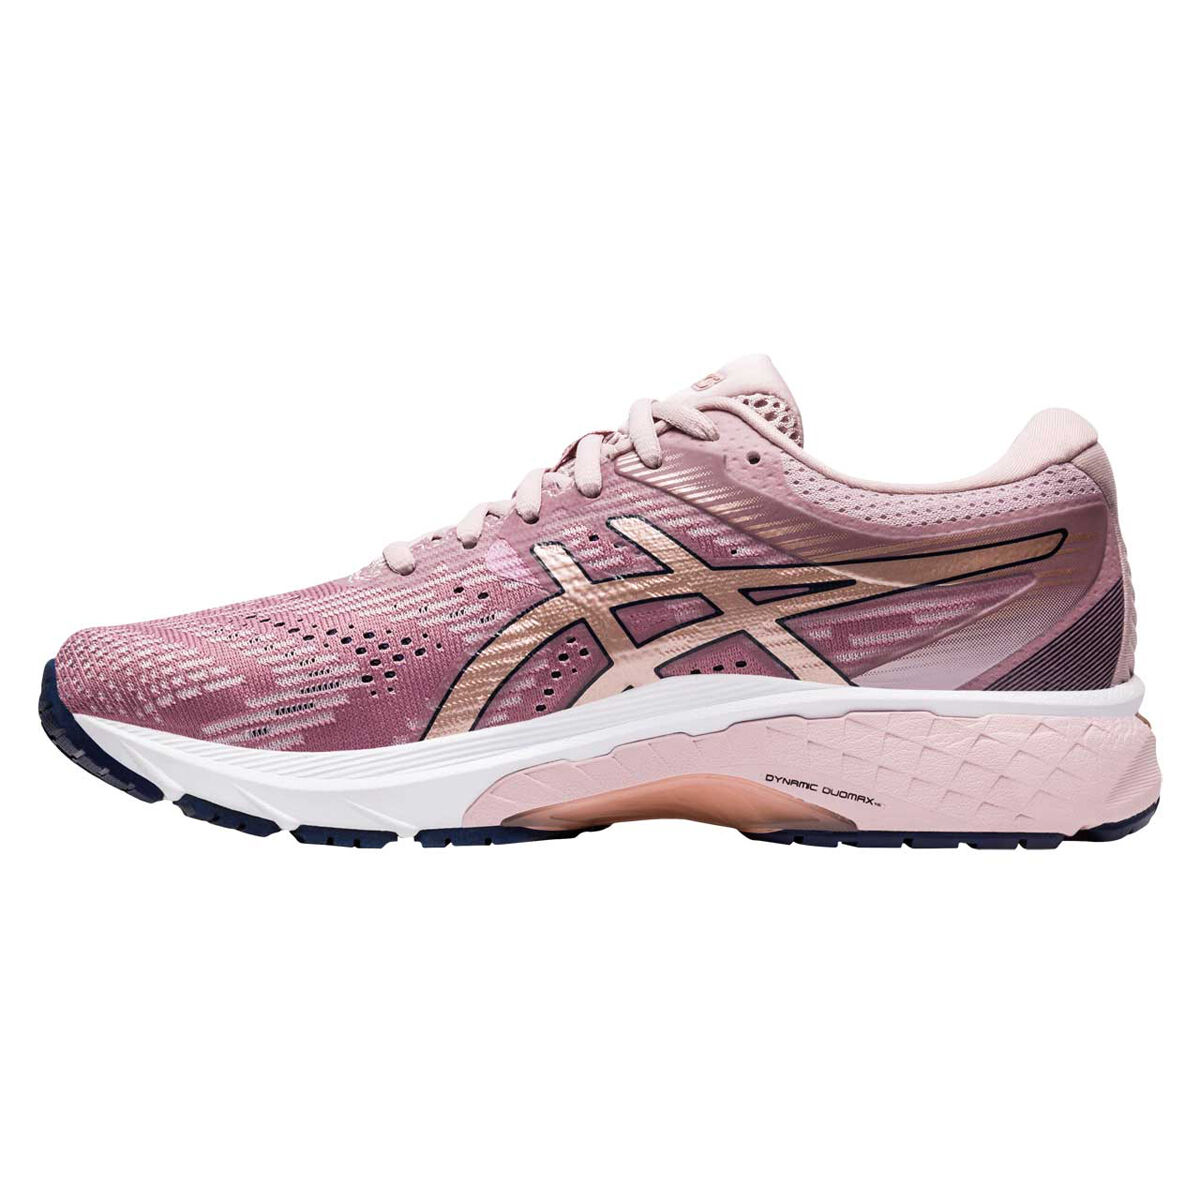 asics gt 2000 womens wide fit